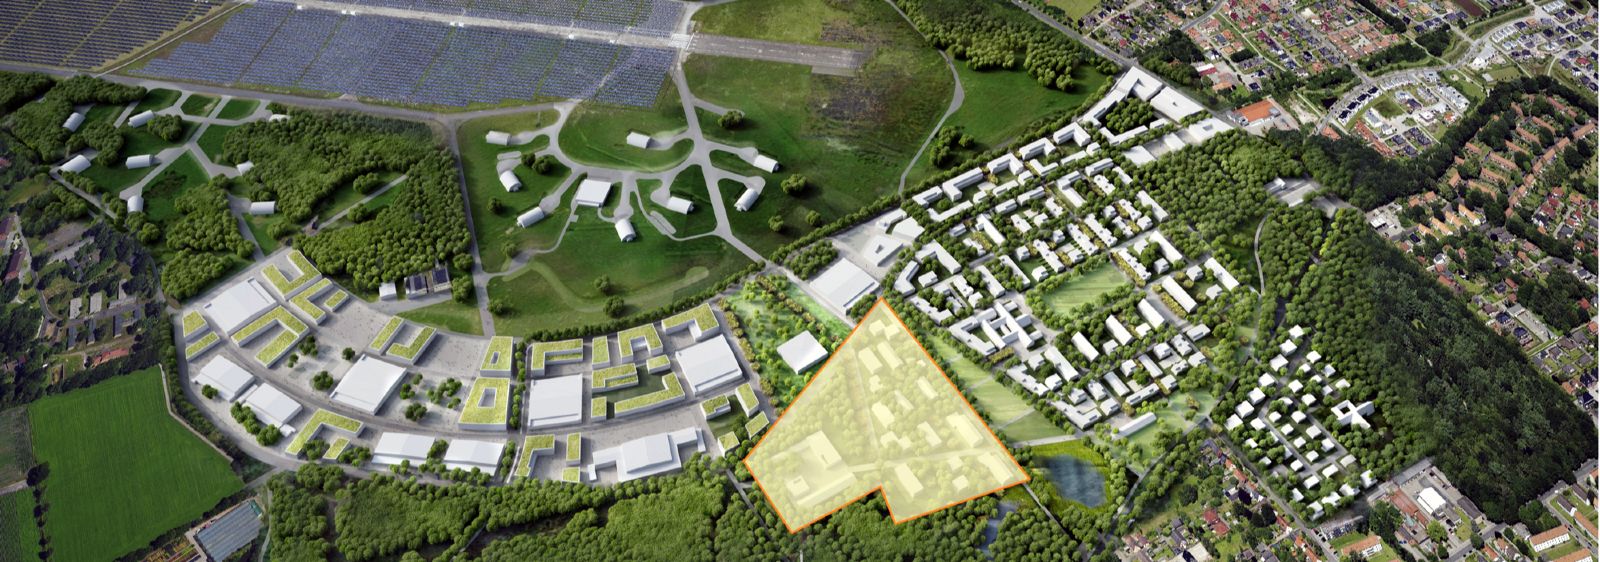 Part of the airfield in Oldenburg is being developed as a “real-world laboratory” in which the residents will predominantly meet their energy requirements from locally generated energy.